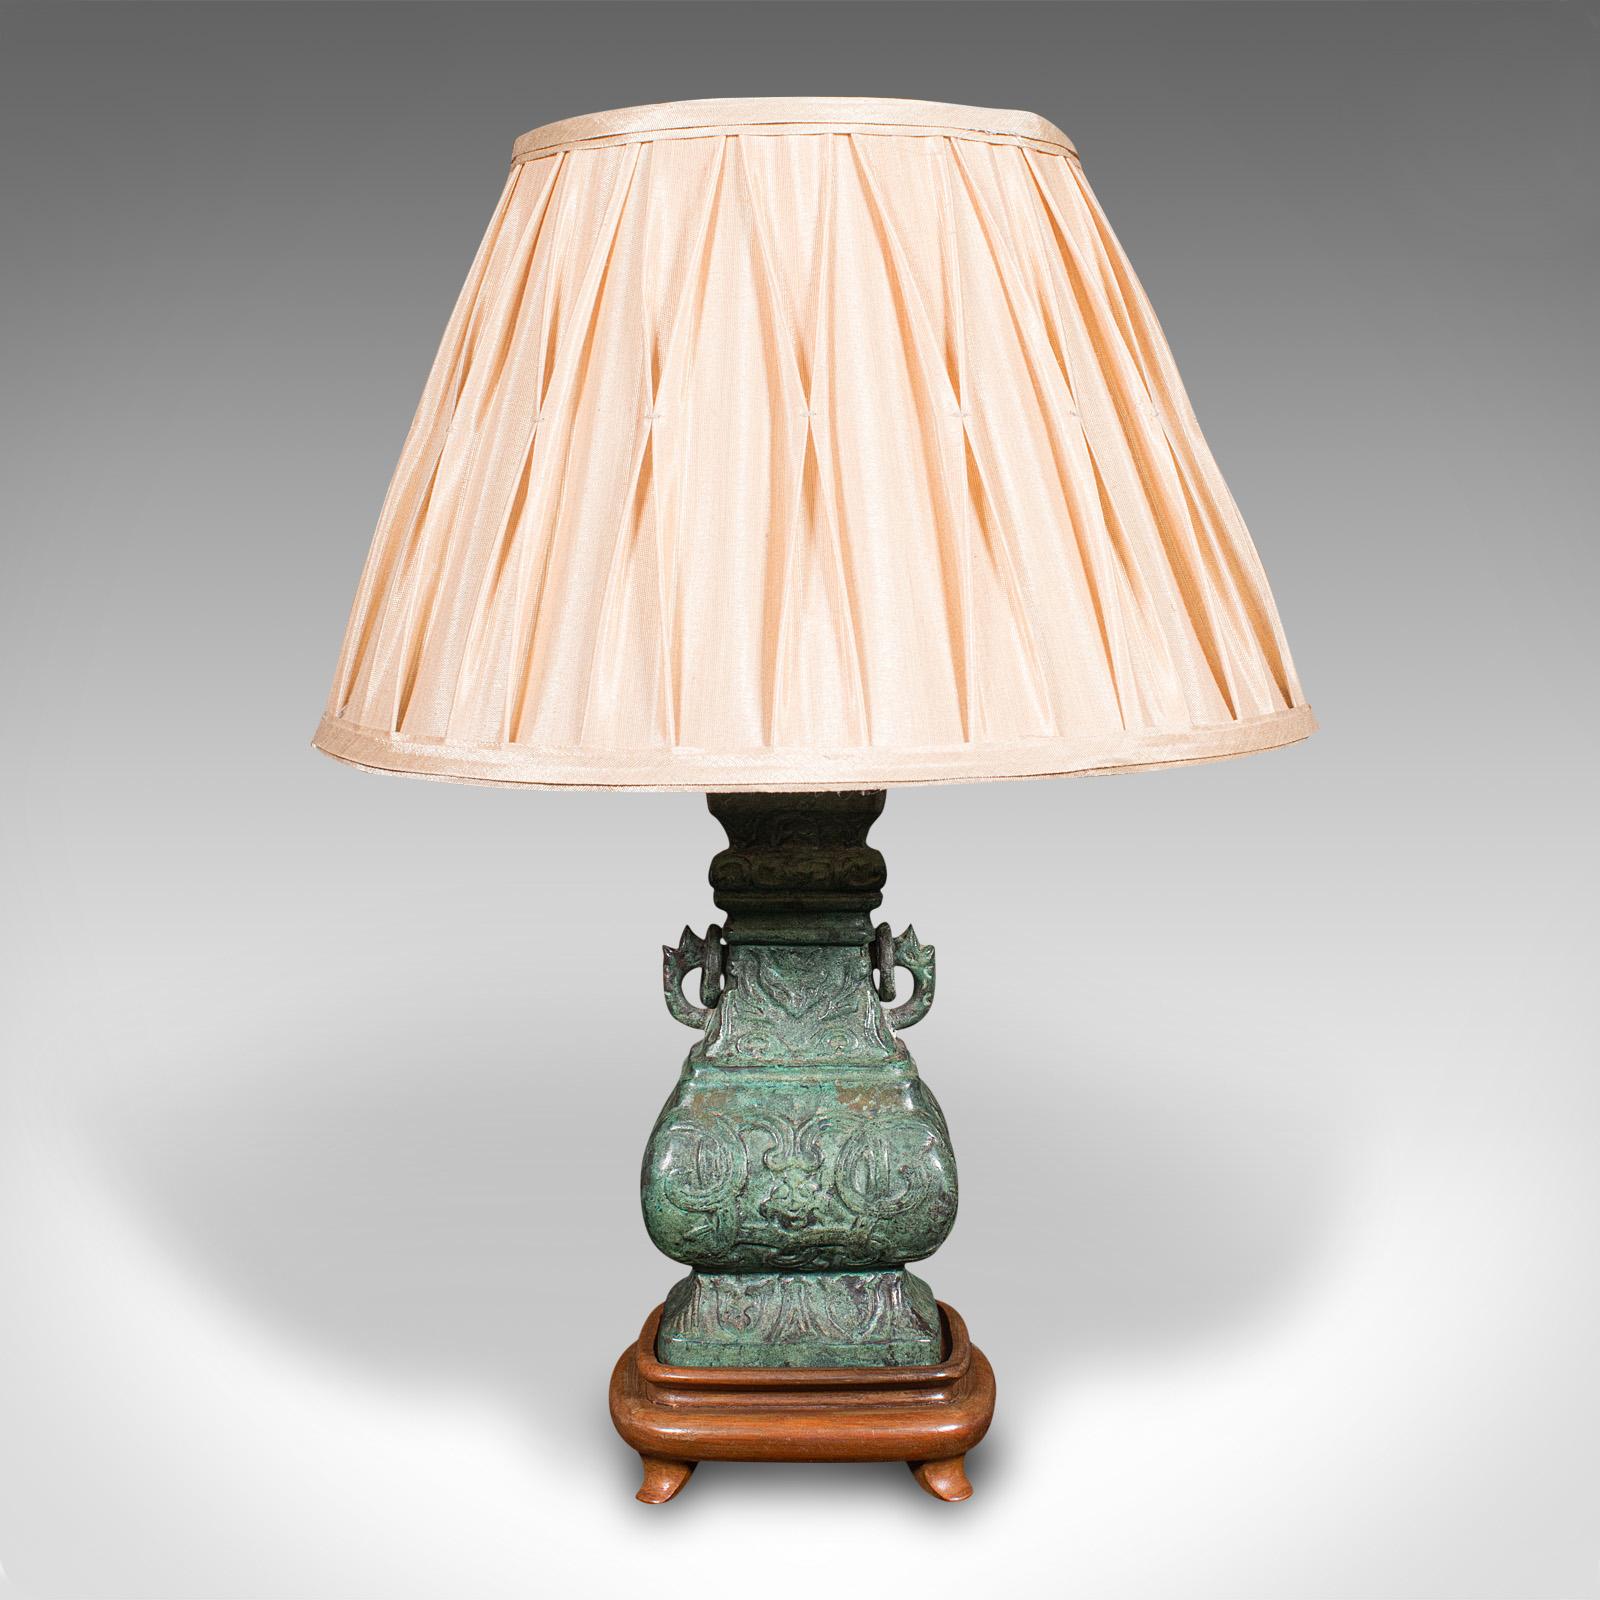 20th Century Vintage Decorative Table Lamp, Chinese, Bronze, Accent Light, Mid Century, 1960